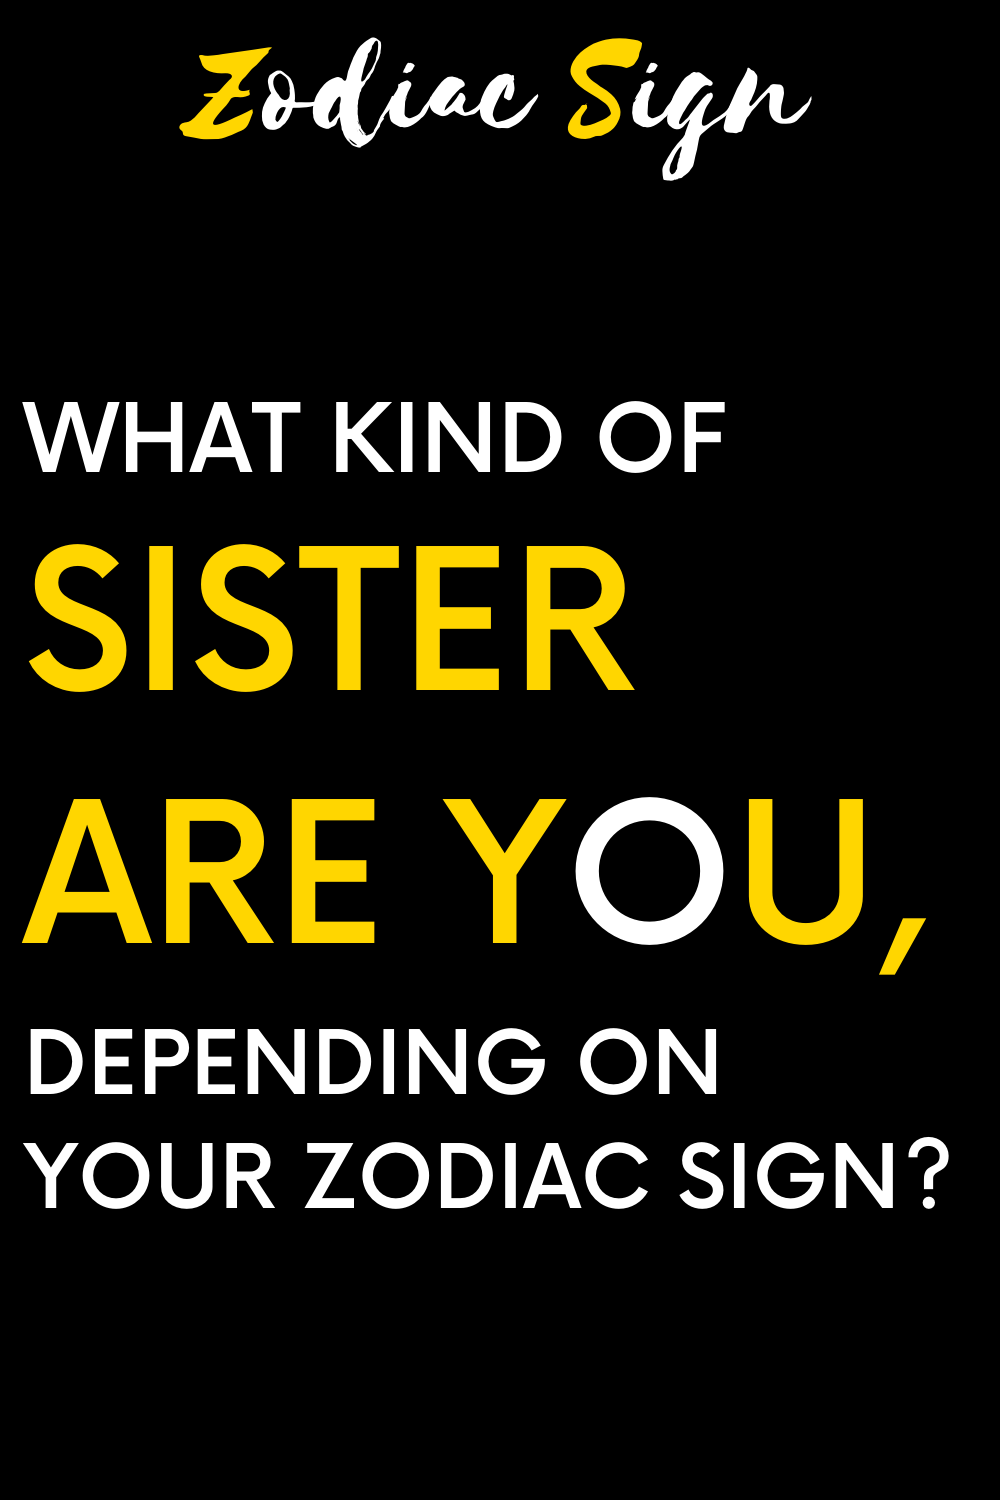 What kind of sister are you, depending on your zodiac sign?